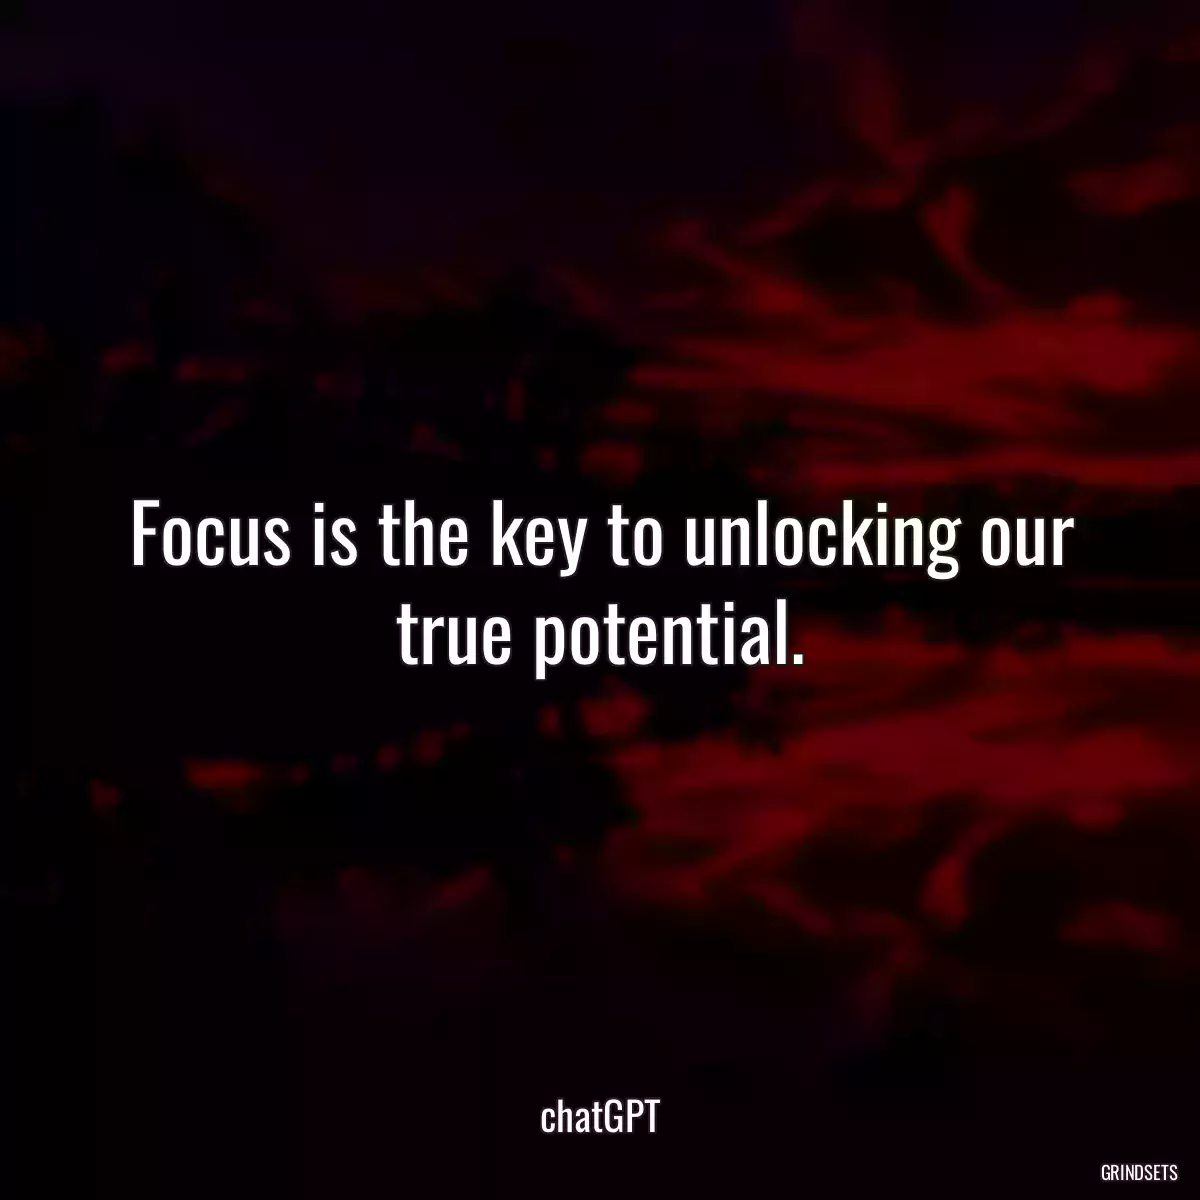 Focus is the key to unlocking our true potential.